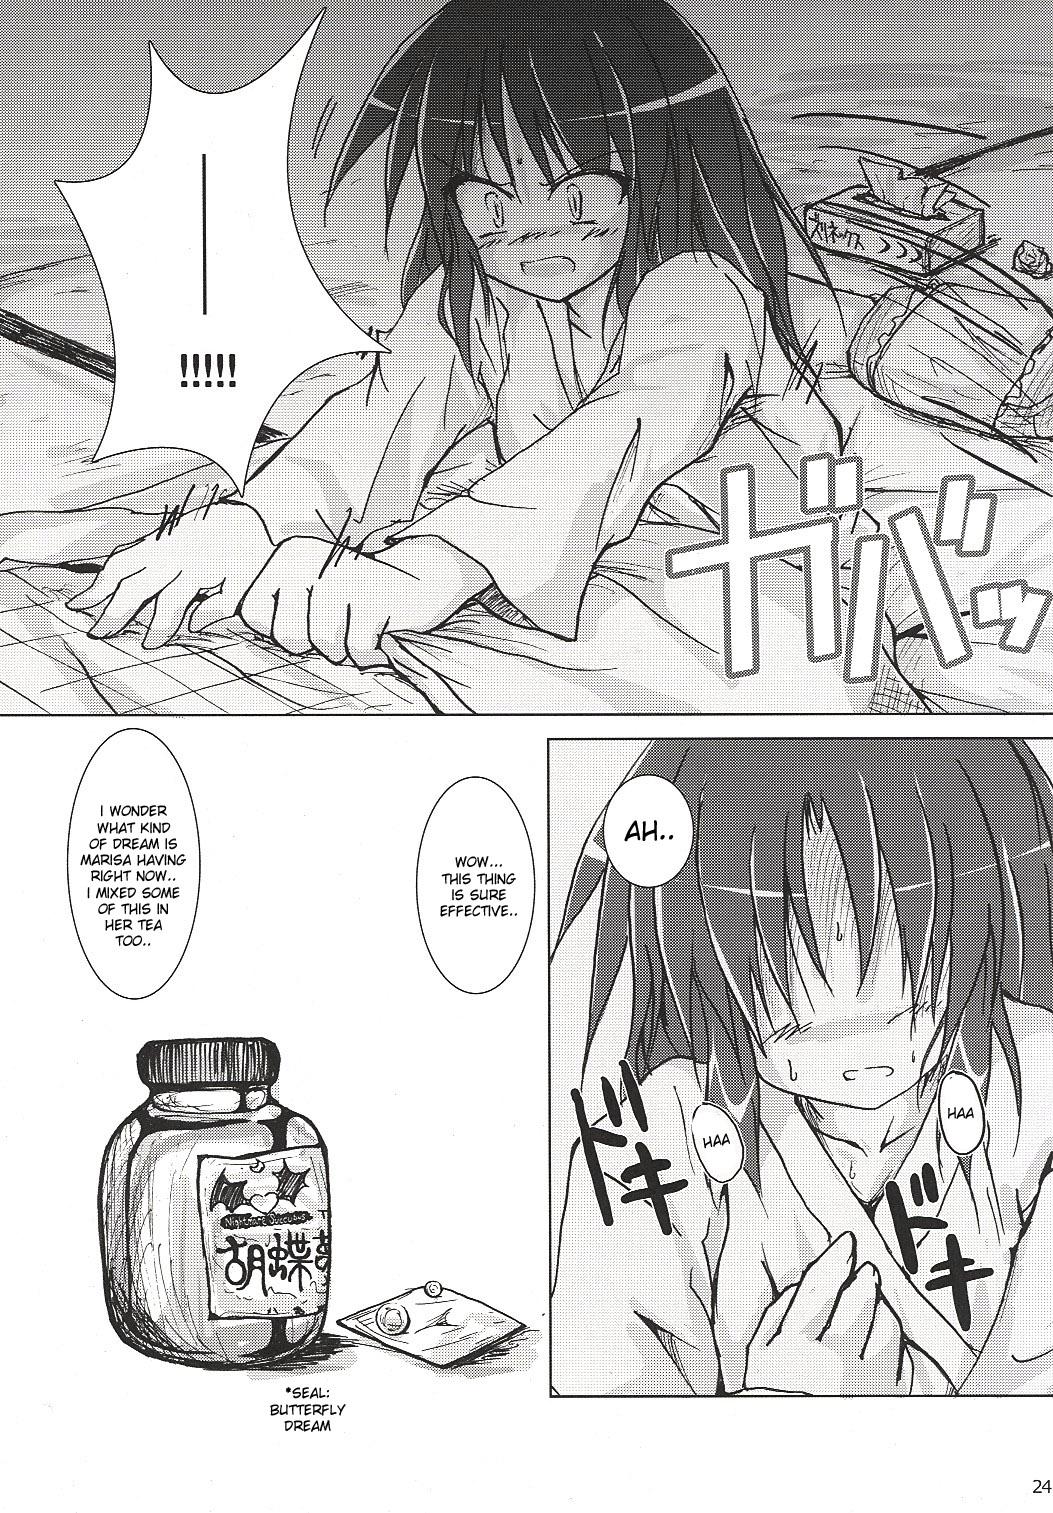 Hot Girls Getting Fucked Humbly Made Steamed Yeast Bun - Touhou project Gay Smoking - Page 23